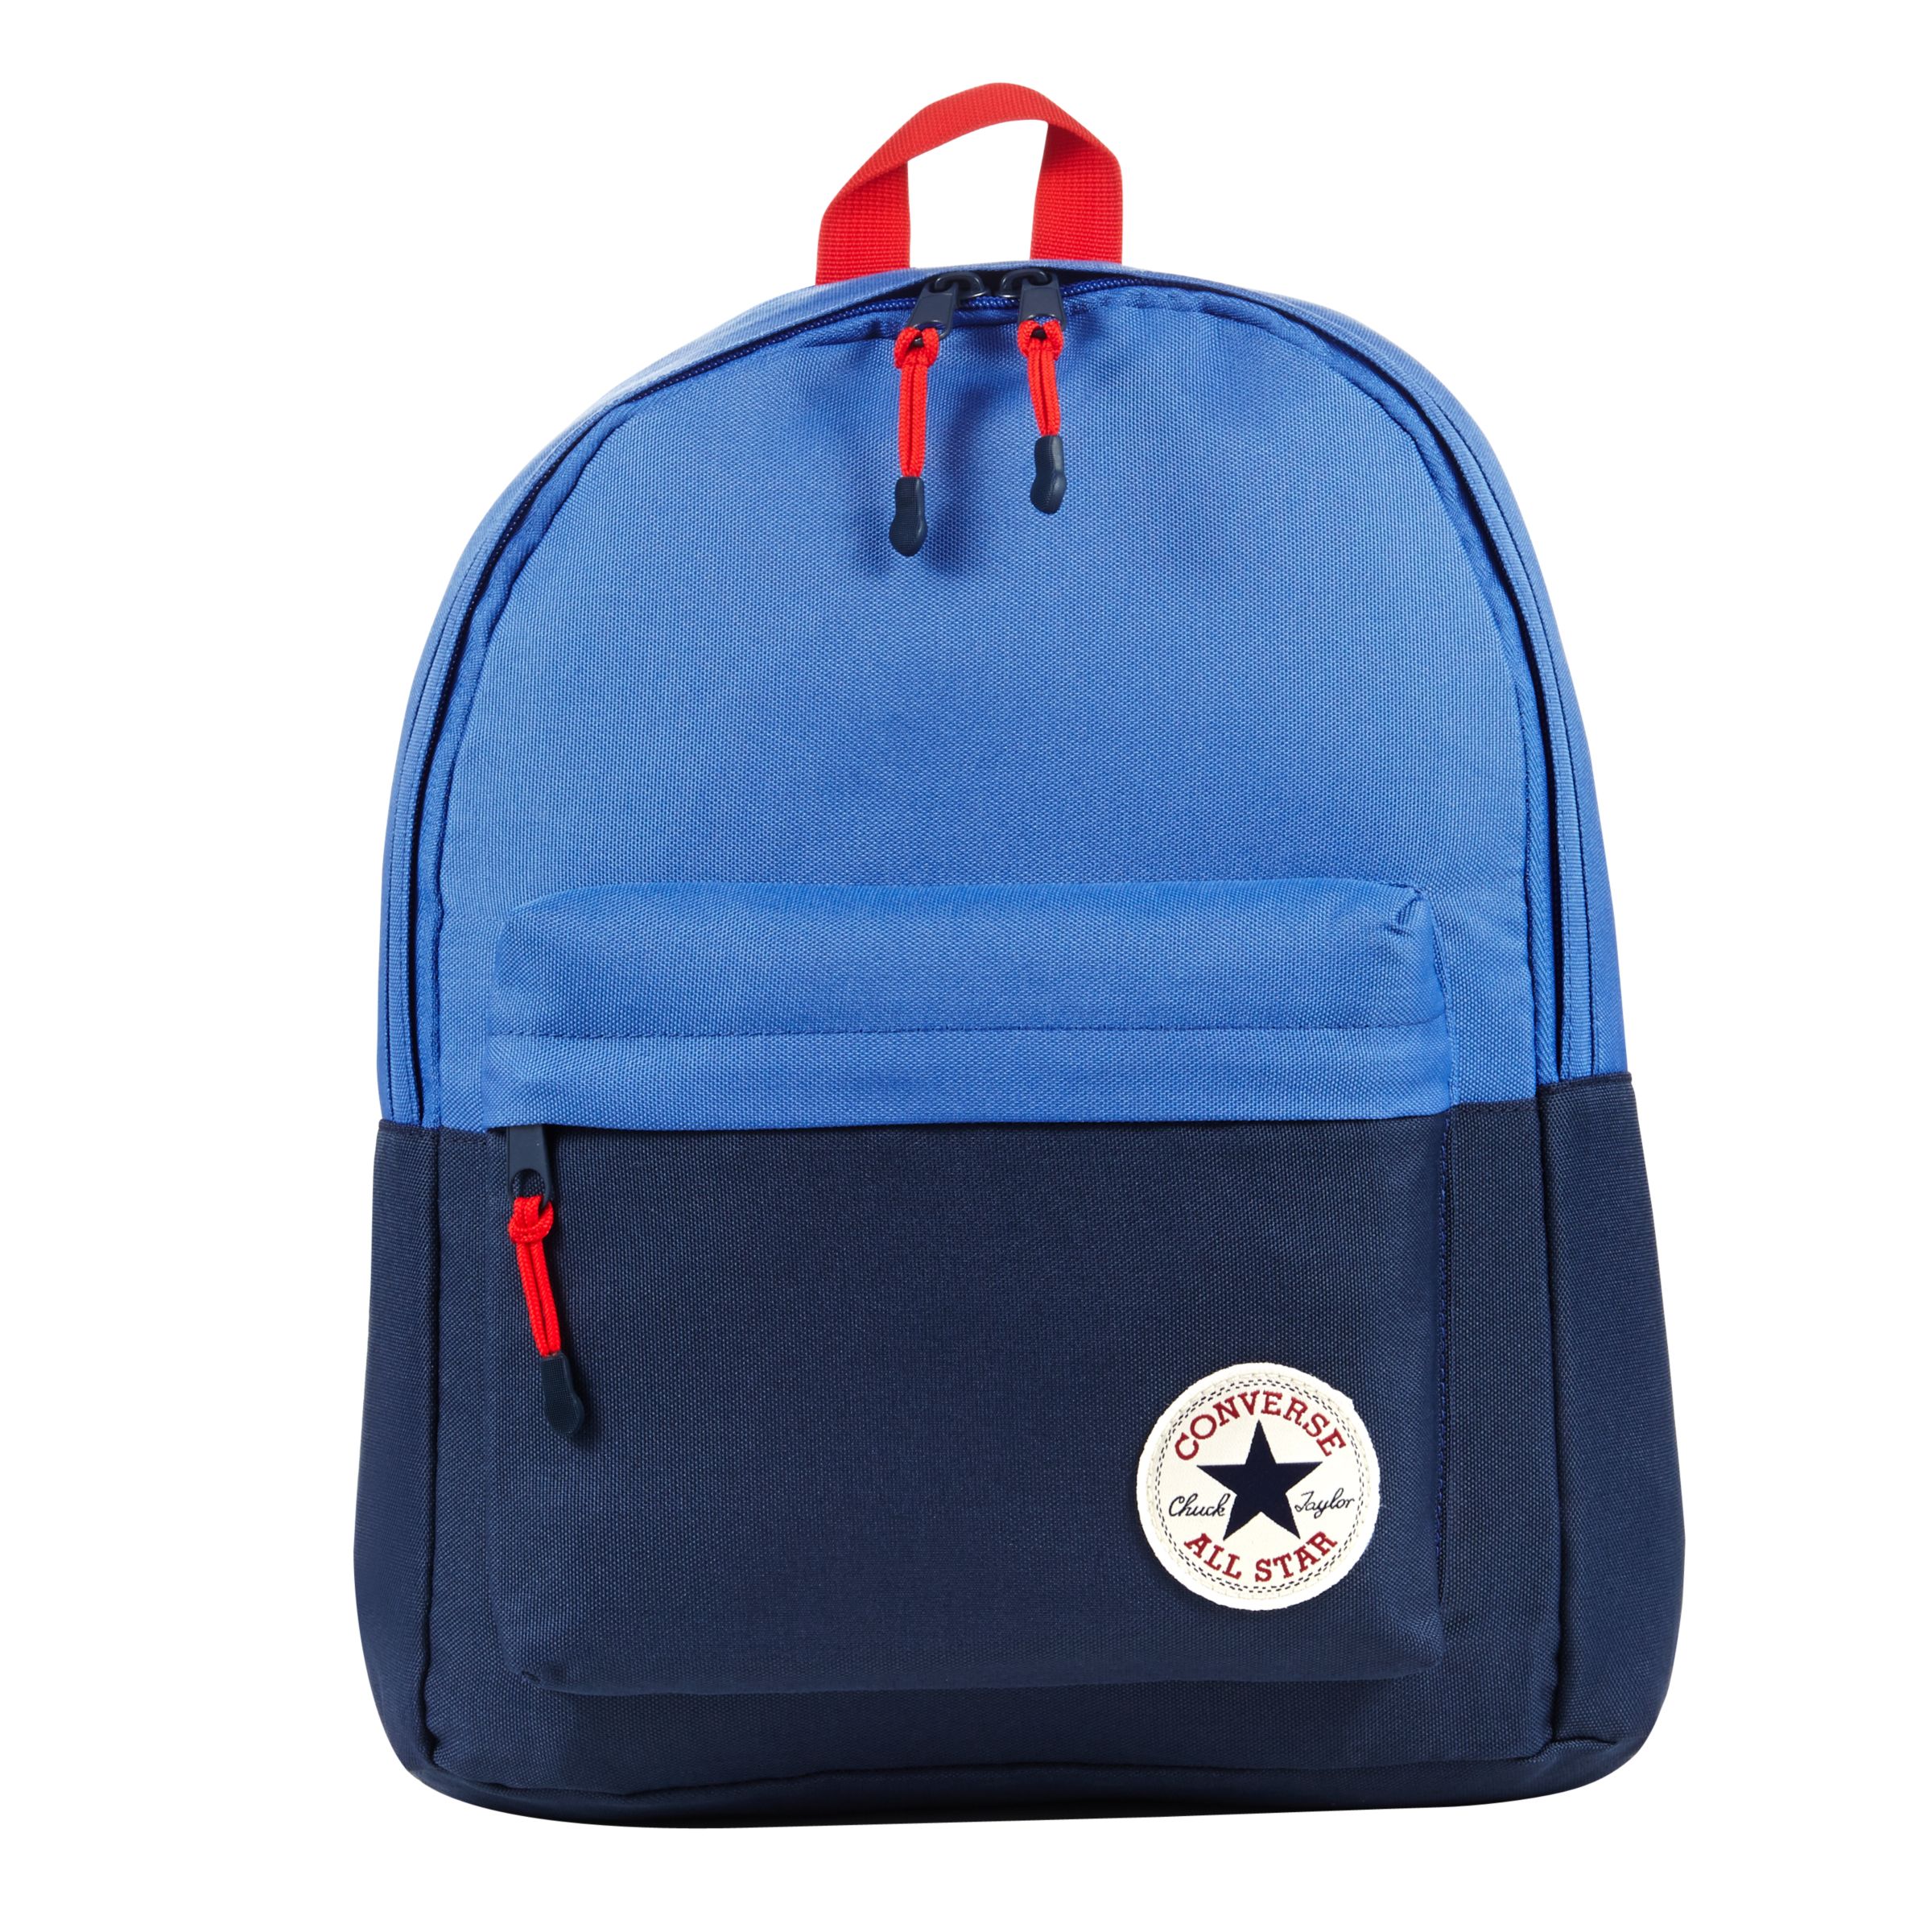 converse travel backpack